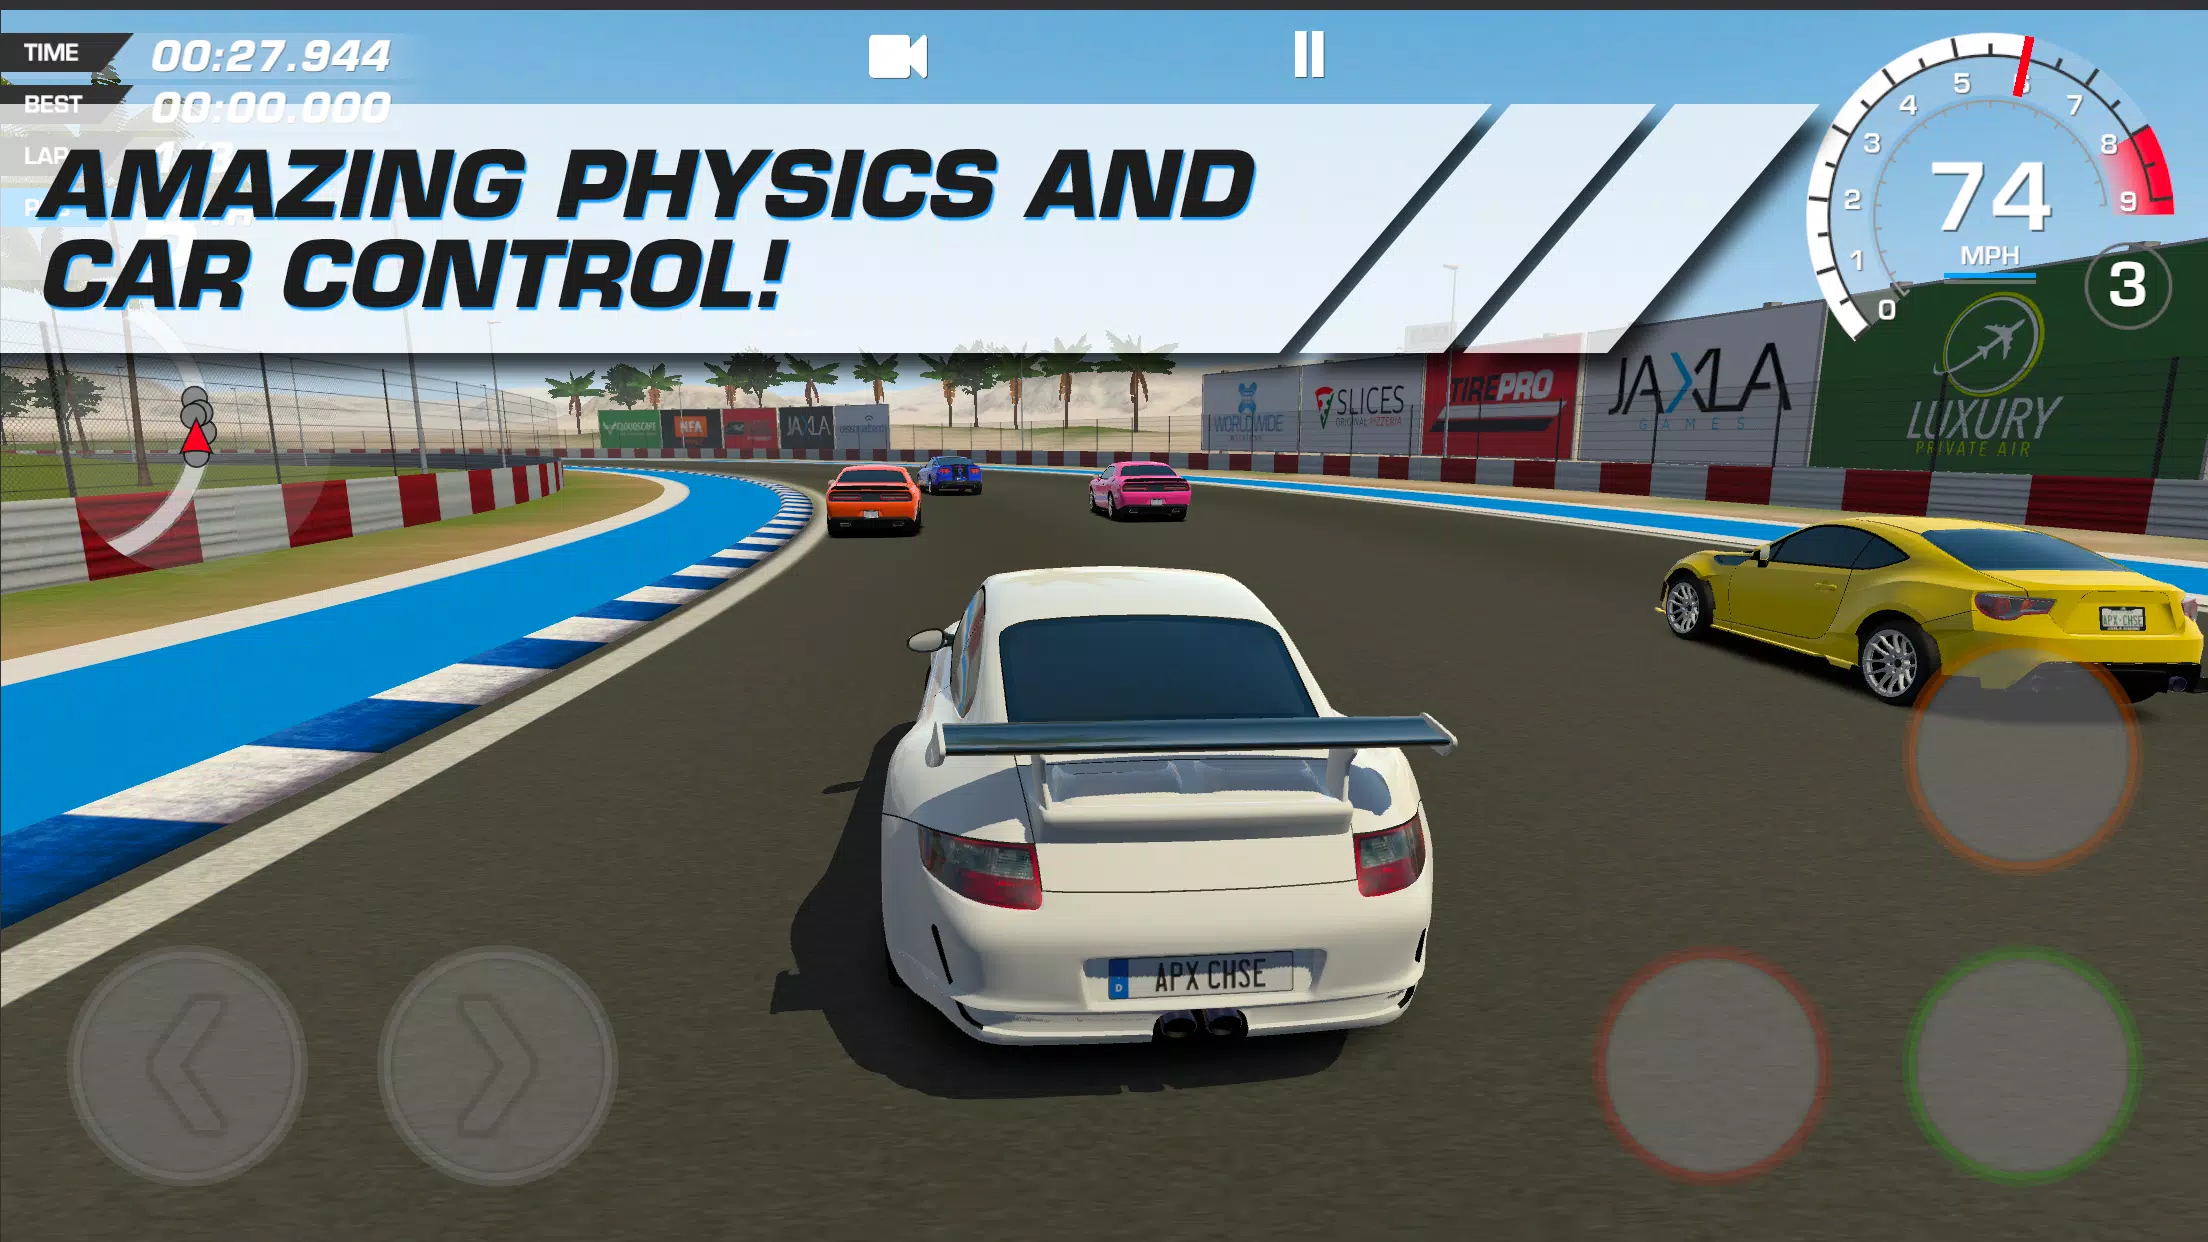 FORZA HORIZON FOR MOBILE?? APEX RACING [ANDROID & IOS] DOWNLOAD